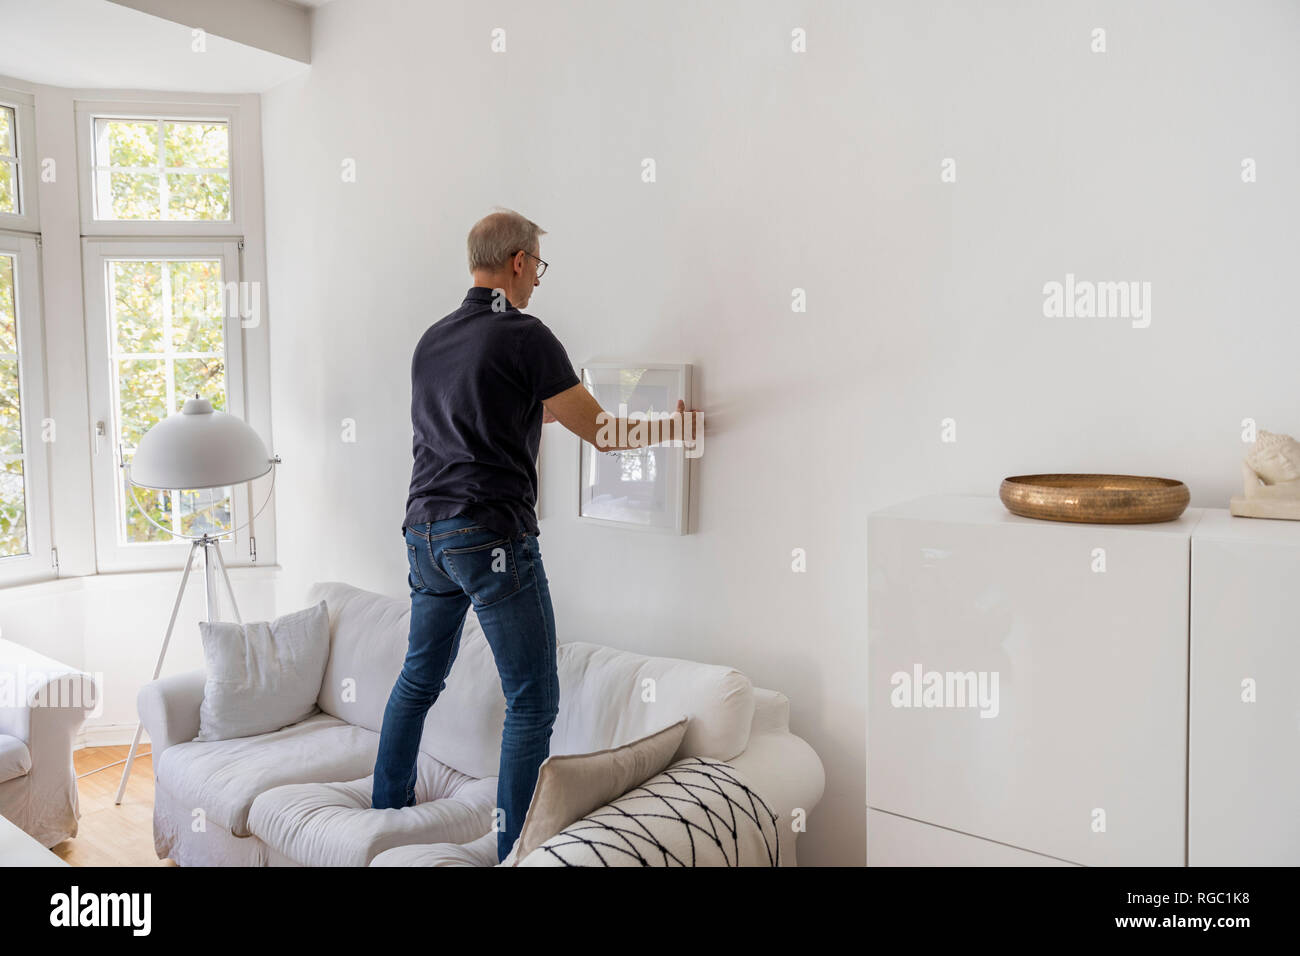 Back view of mature man hanging up picture frame at home Stock Photo